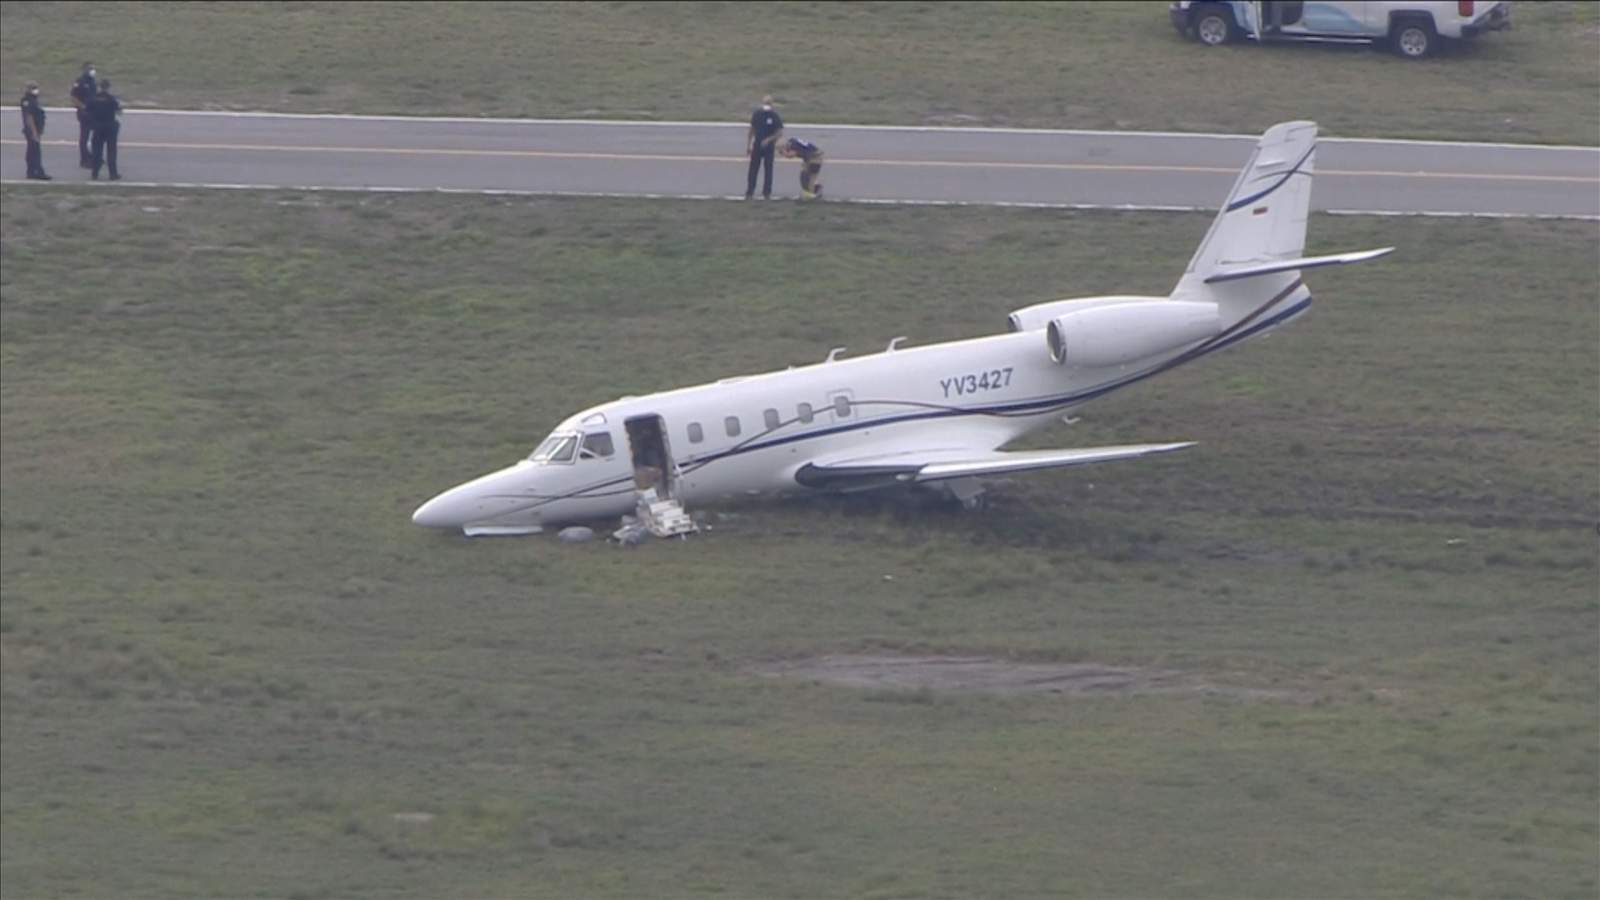 The pilot of a private jet registered in Venezuela was unable to take off and ran off the runway Friday afternoon in Fort Lauderdale.